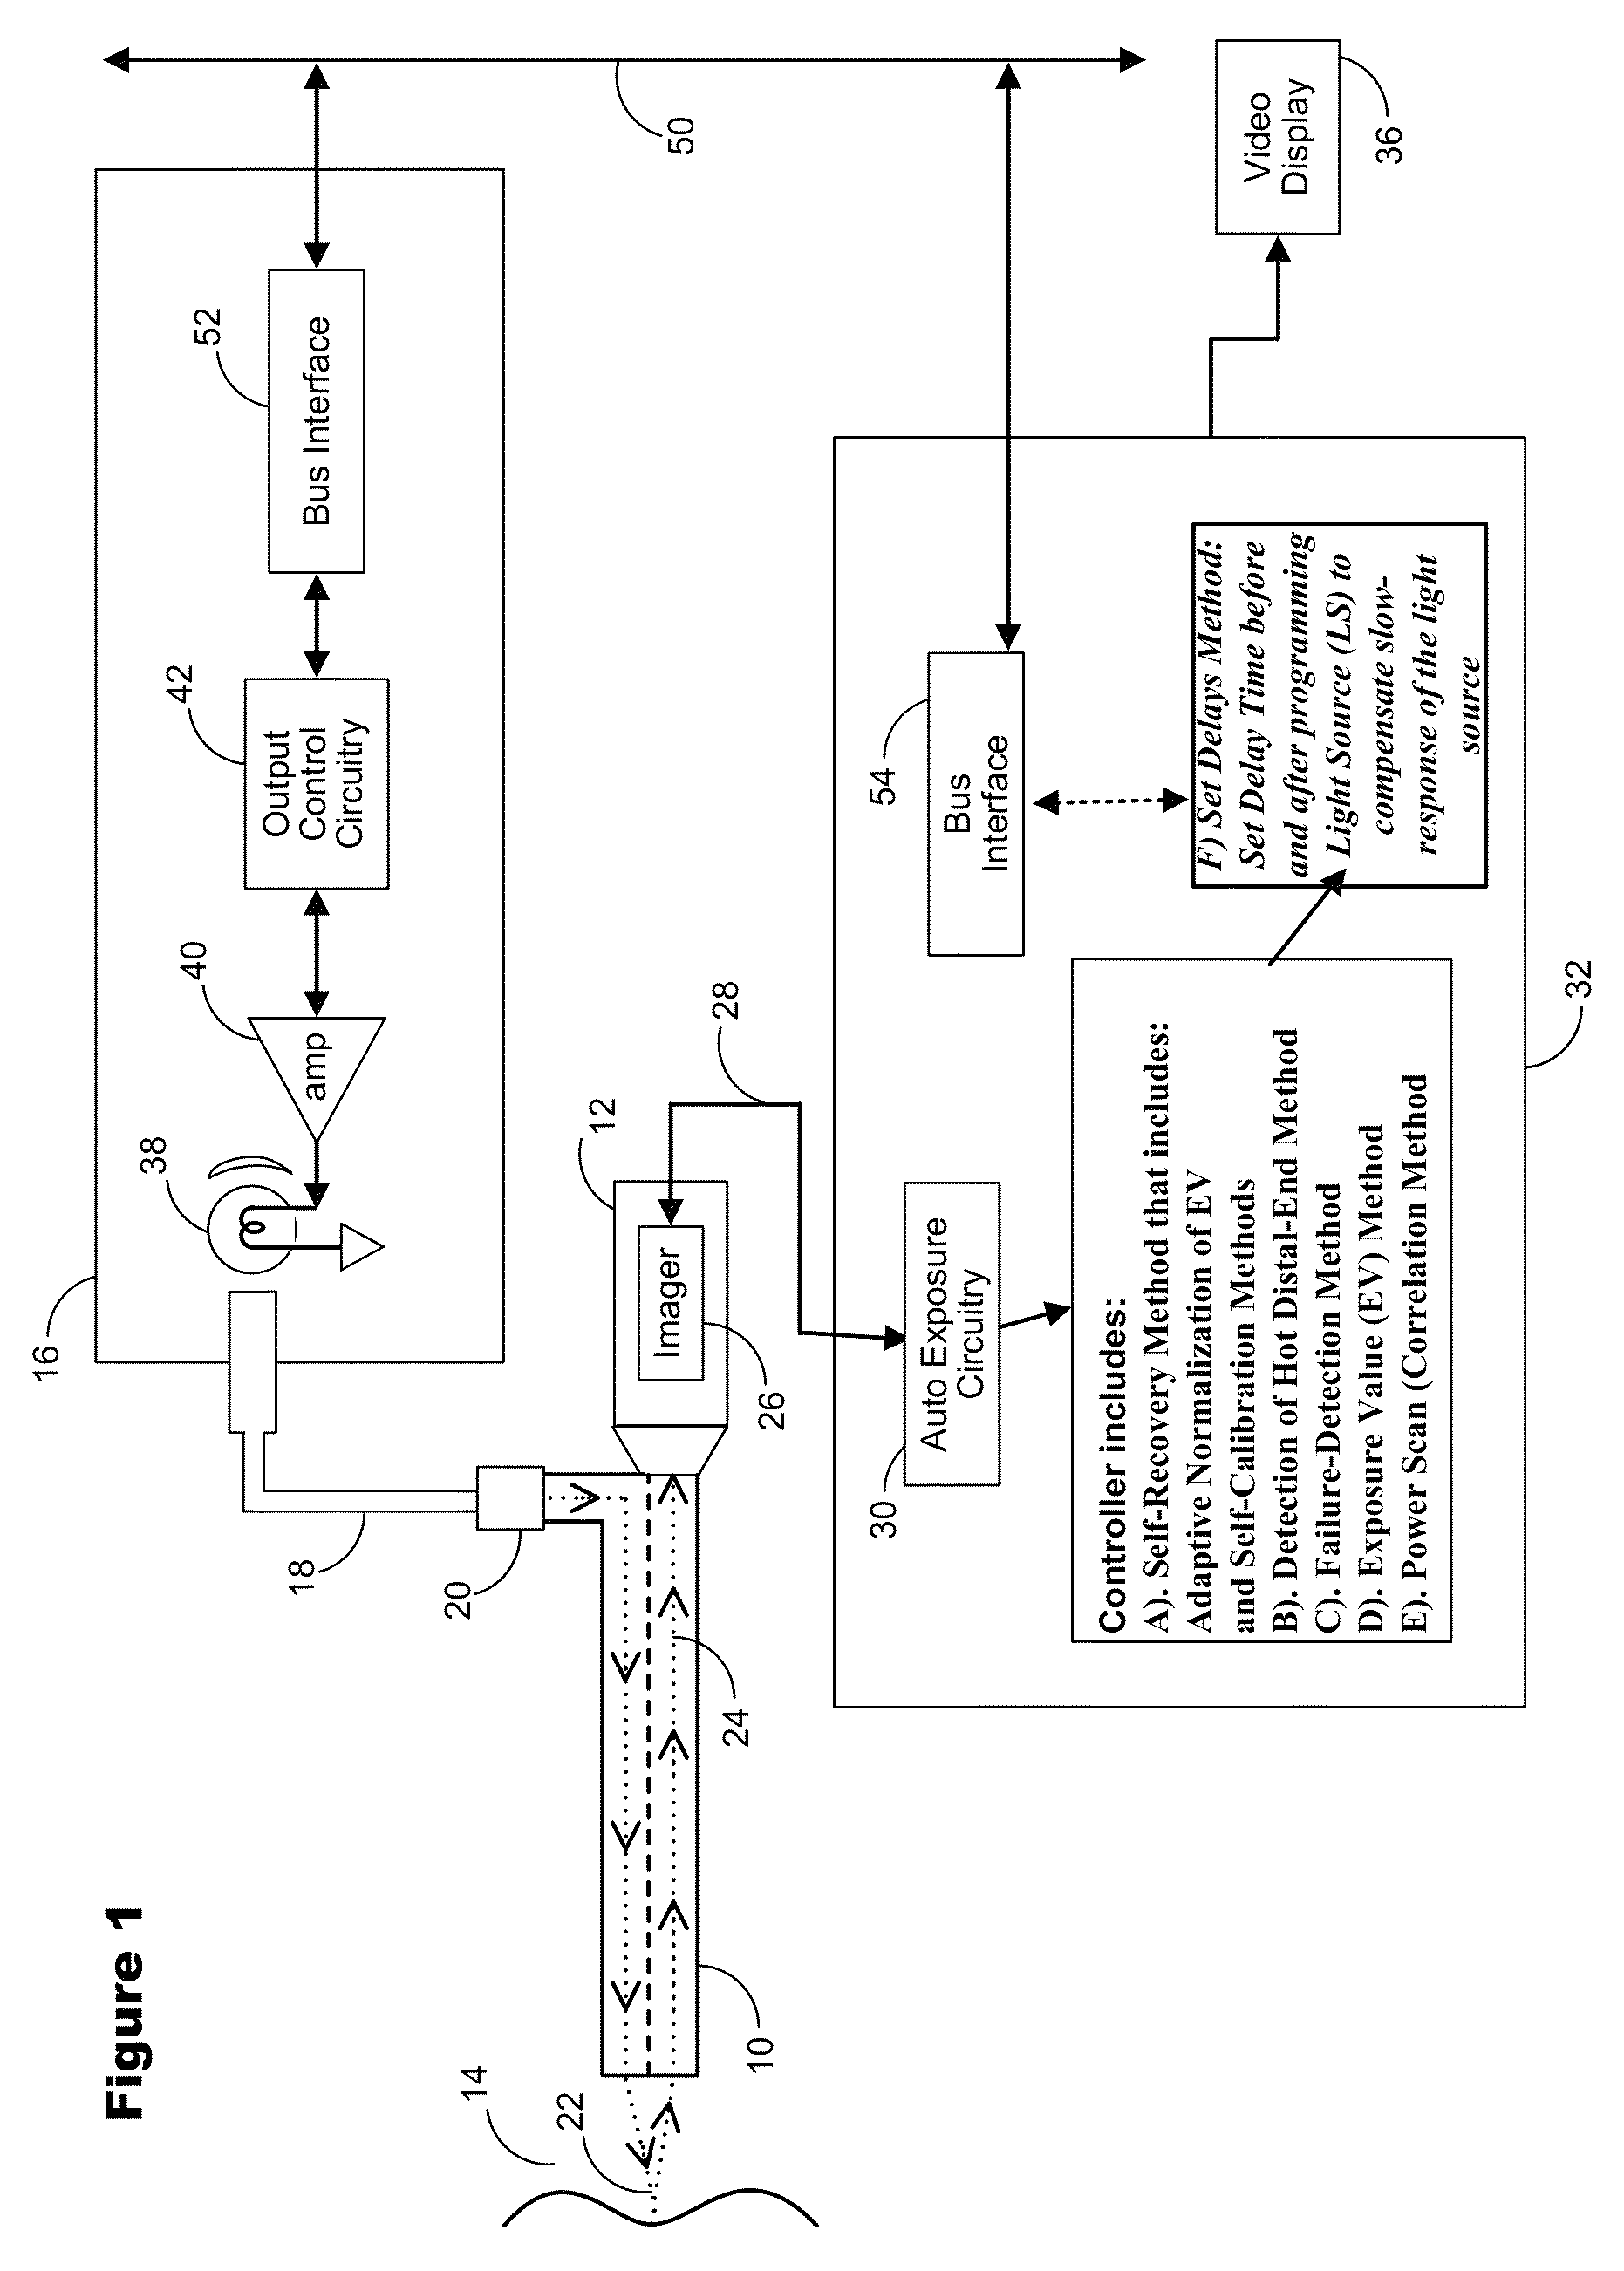 Method and apparatus for protection from high intensity light